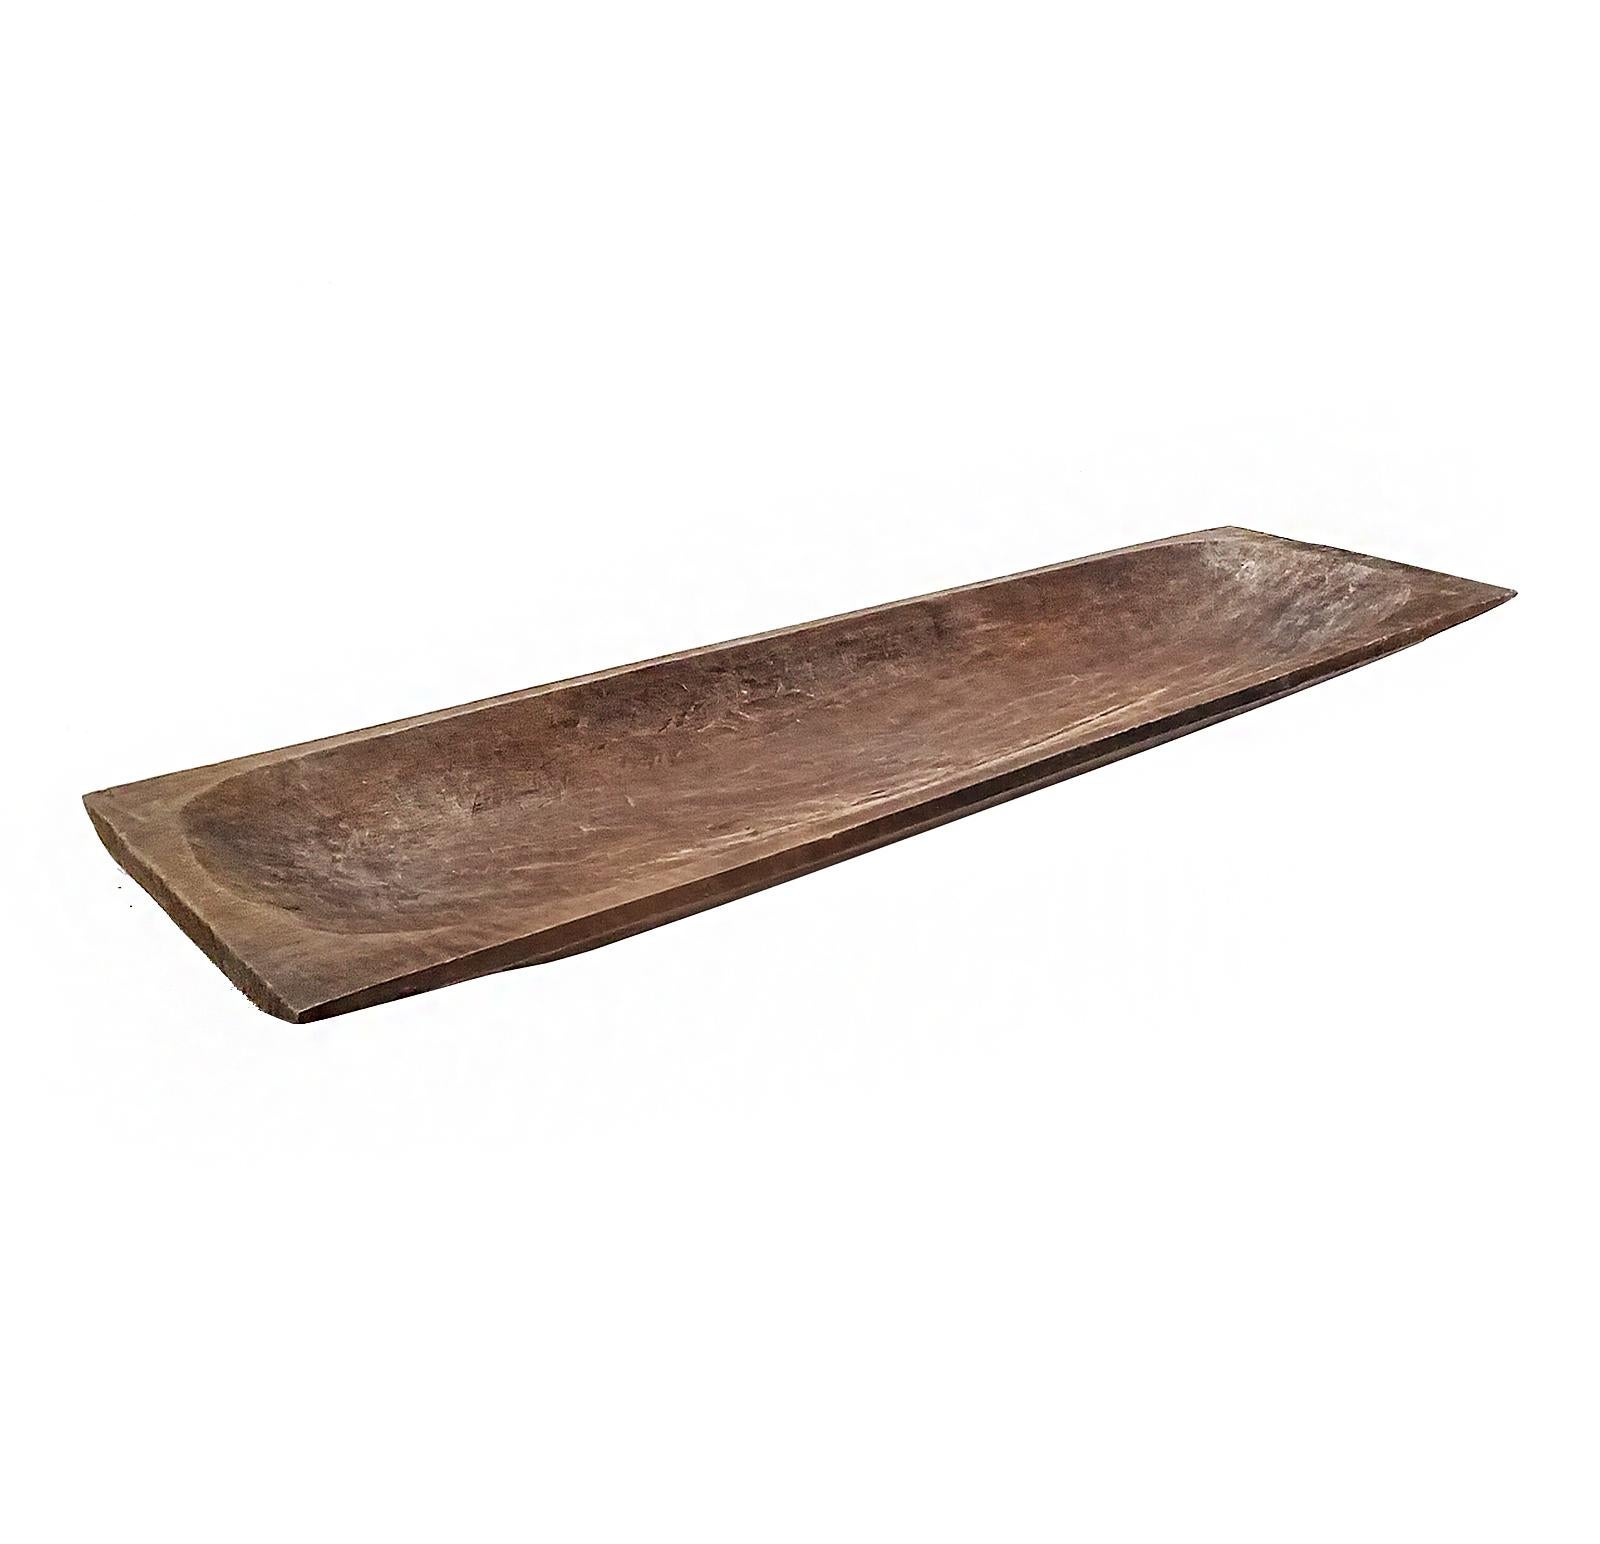 Indonesian Hand-Carved Rectangular Wood Tray from Indonesia, Contemporary For Sale